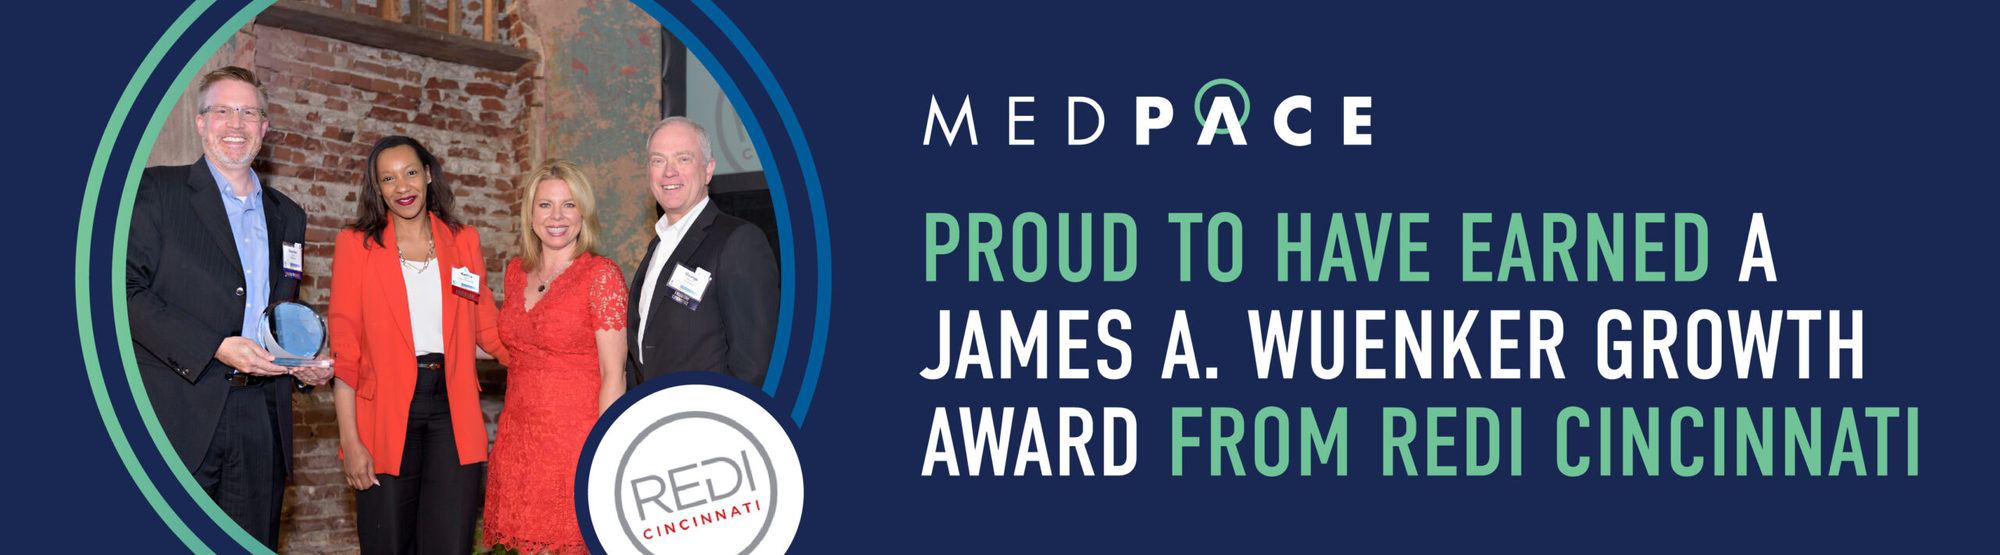 Medpace is proud to have earned a James A. Wuenker Growth Award from REDI Cincinnati